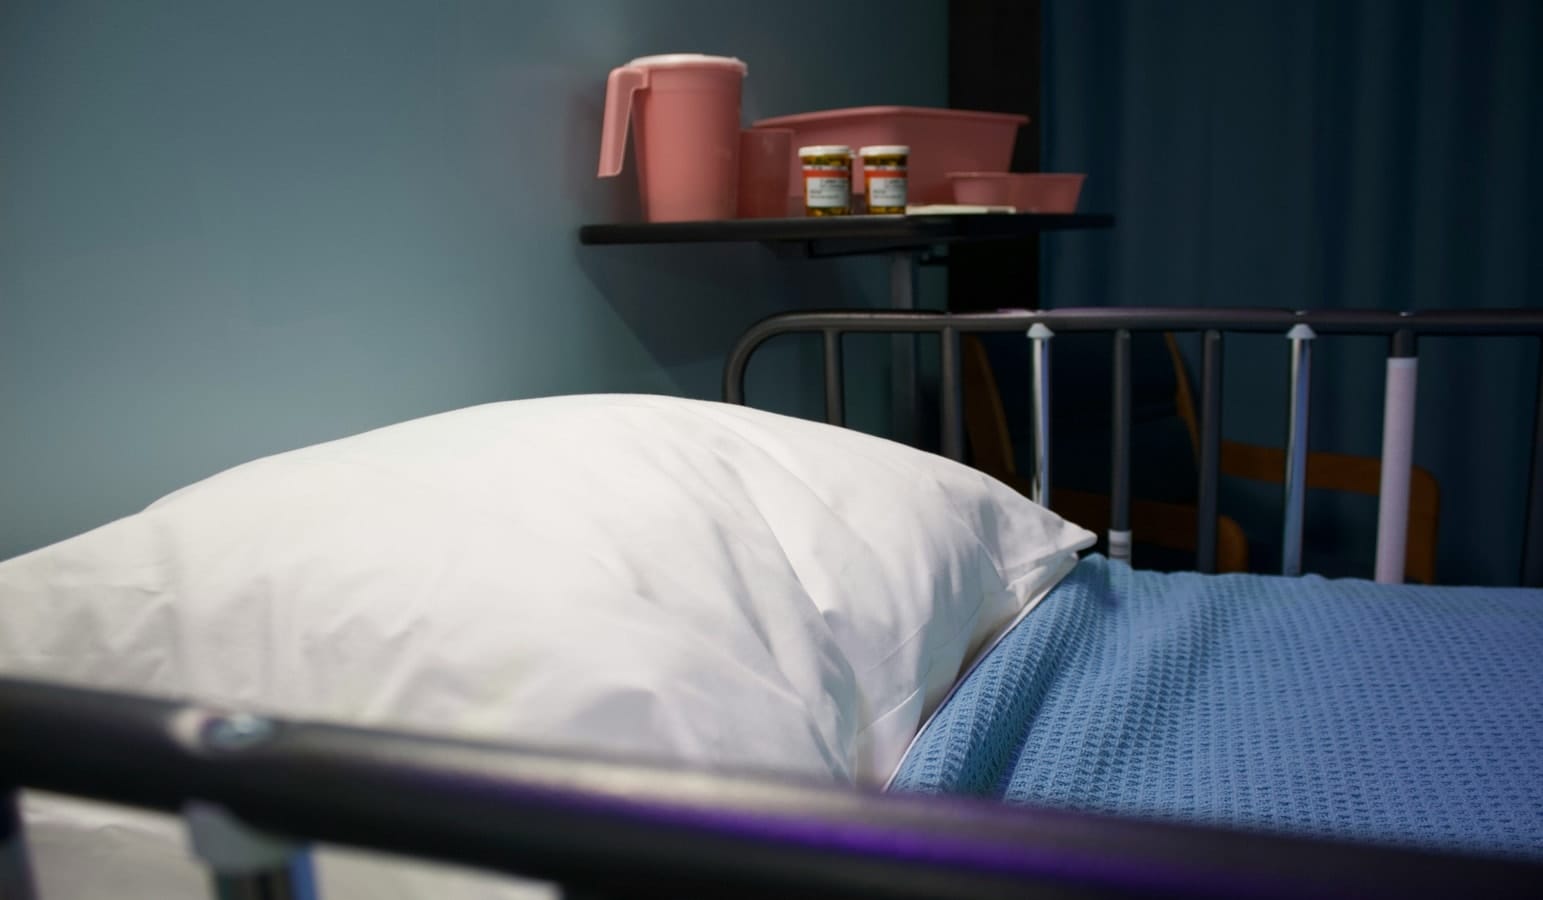 Physically healthy 28-year-old woman in the Netherlands chooses euthanasia. Here’s why